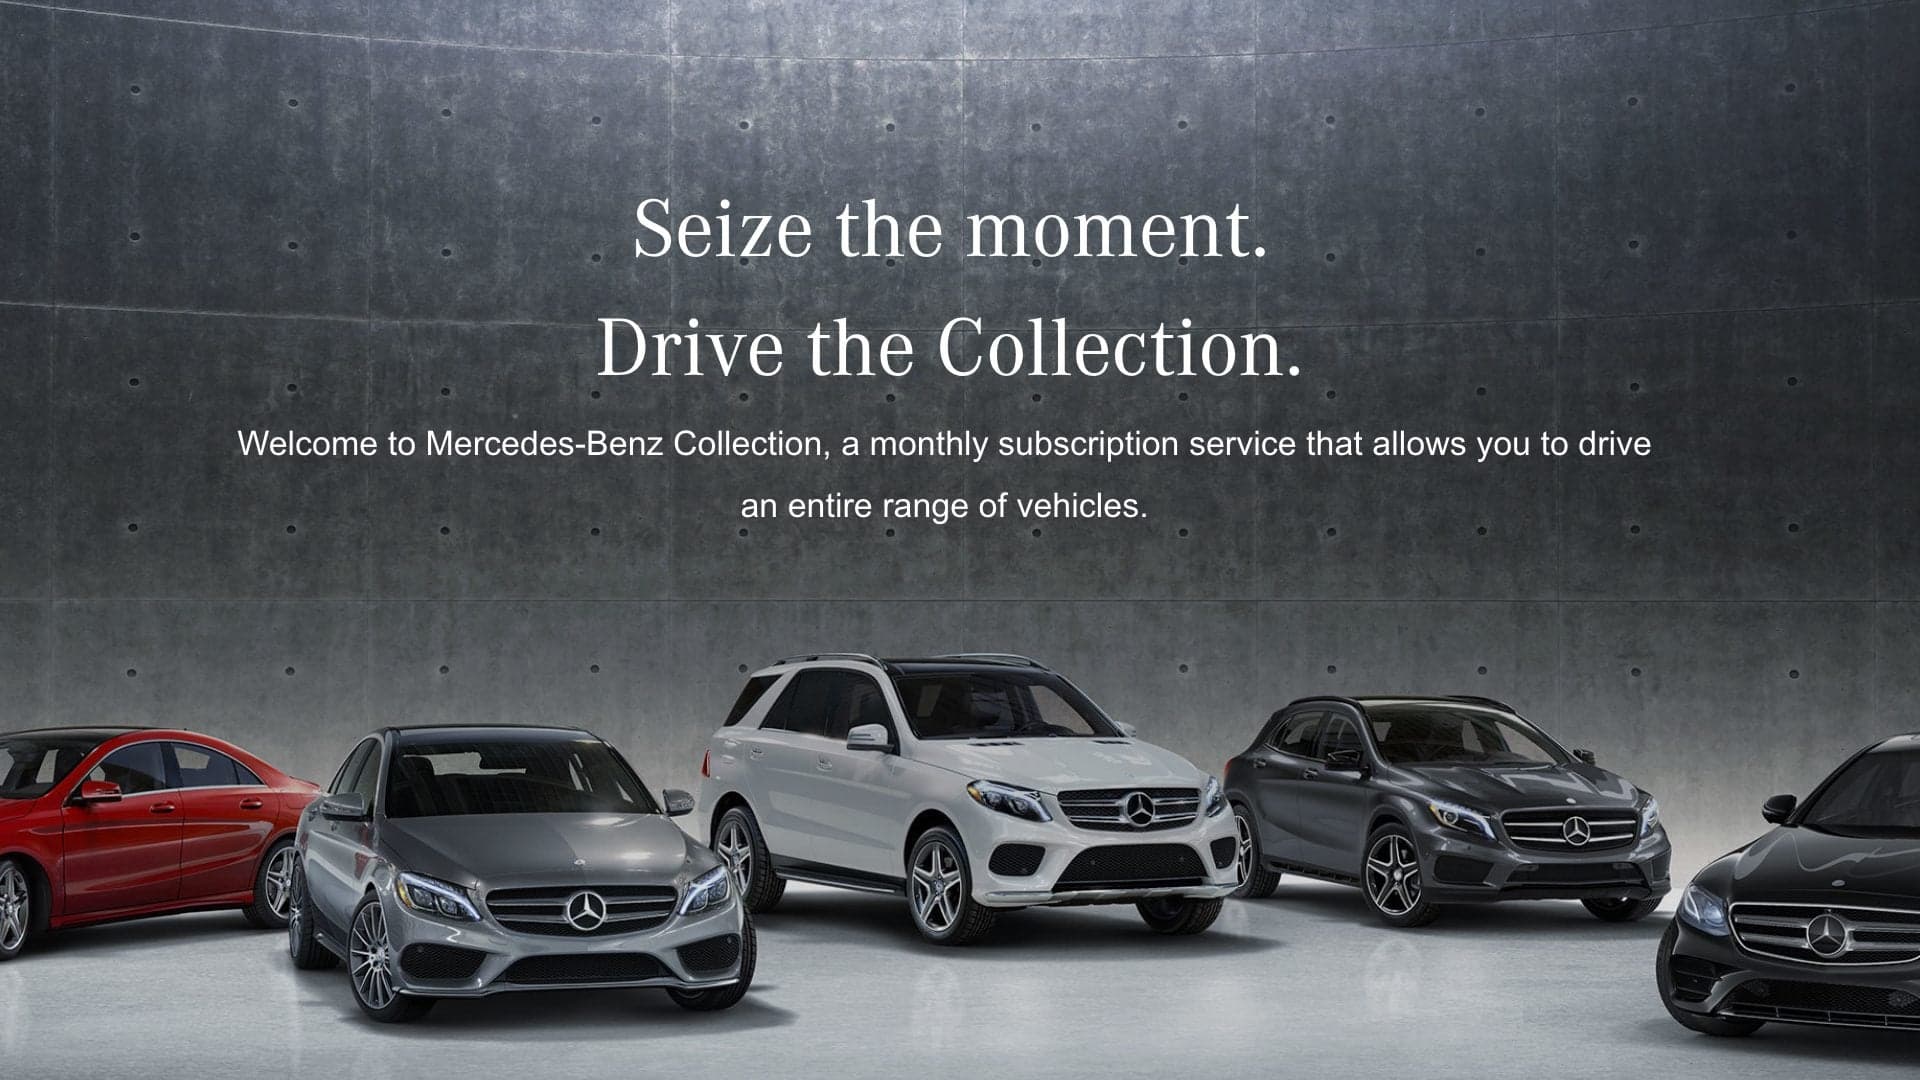 Mercedes-Benz Launches Subscription Service in Test Markets